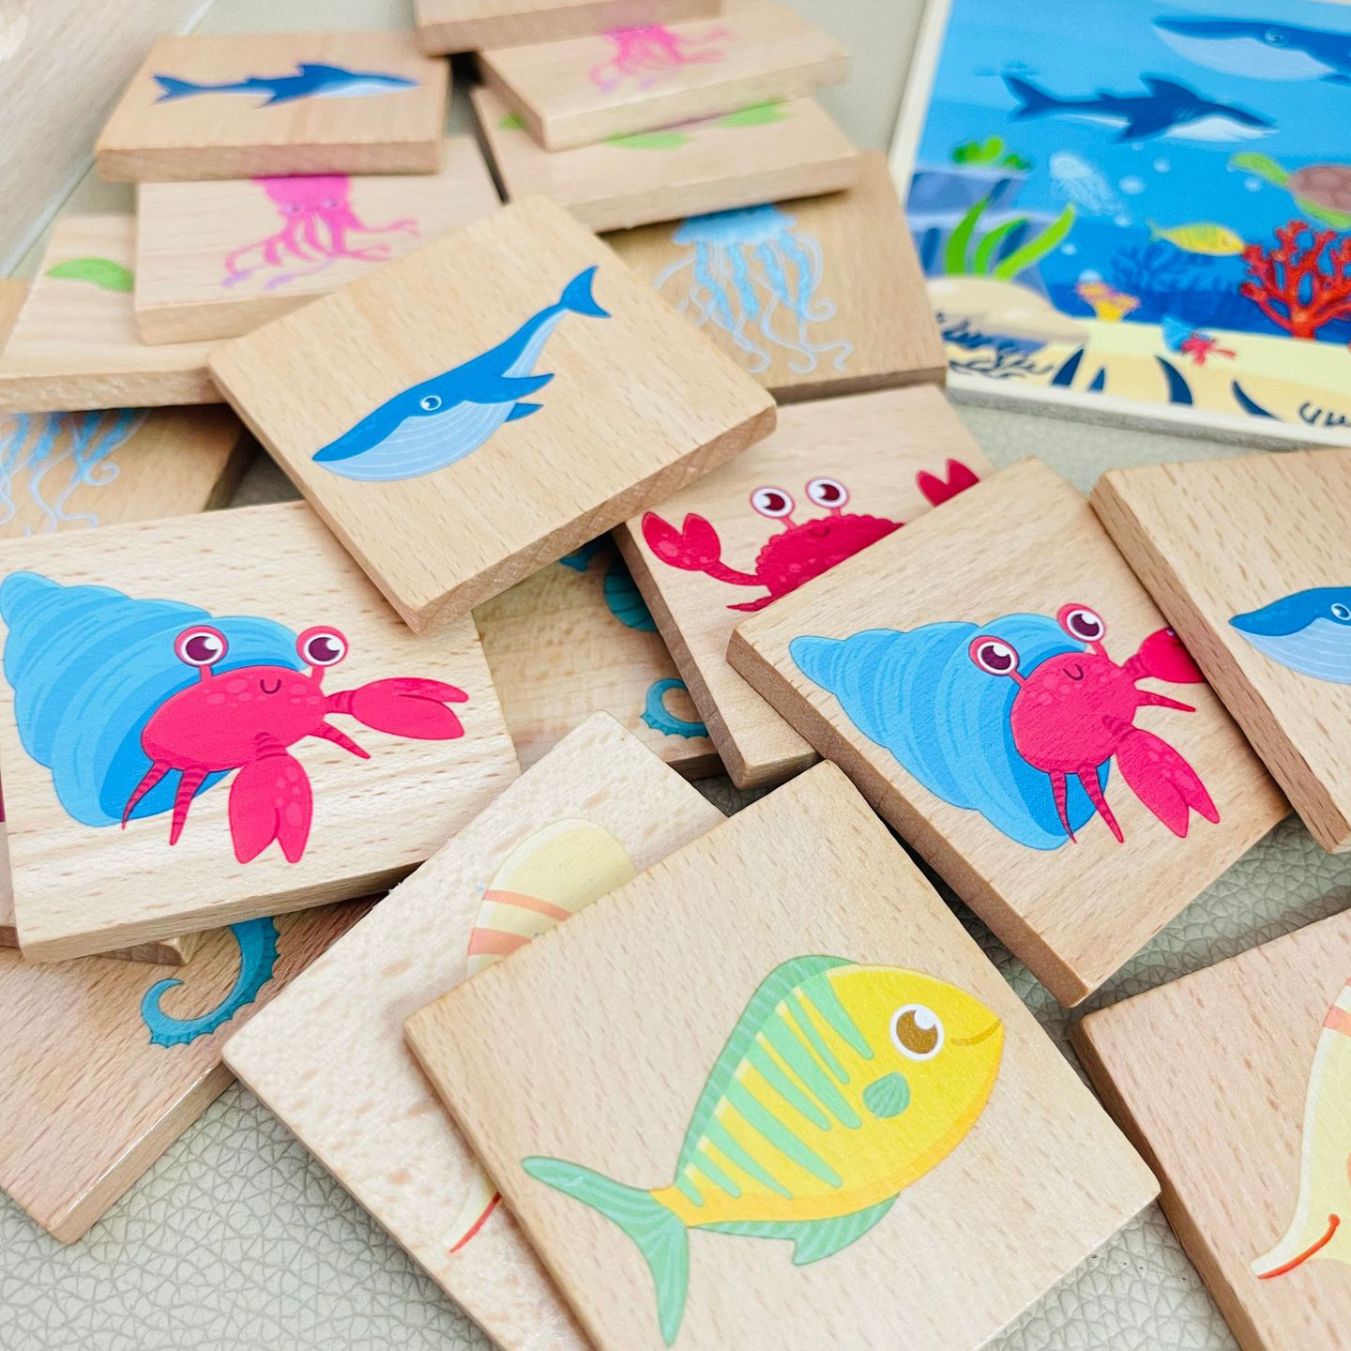 Plative Wooden Sea Animal Matching Game, Early Learning